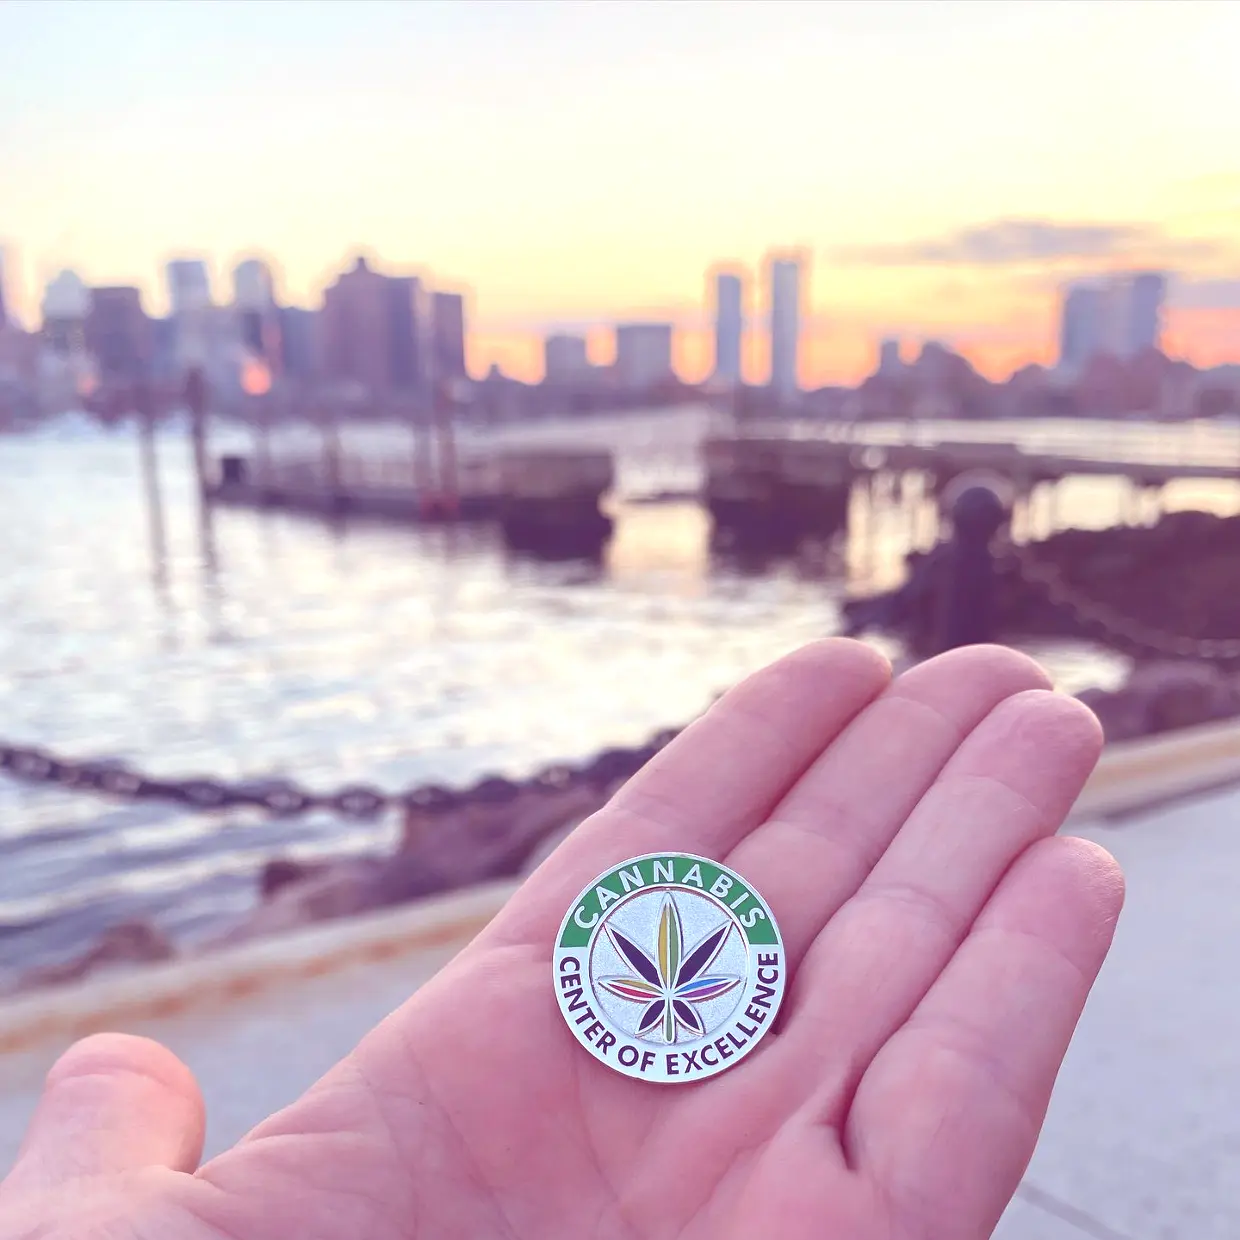 Cannabis Center of Excellence Pin in the Palm of a hand. Beatiful city background.